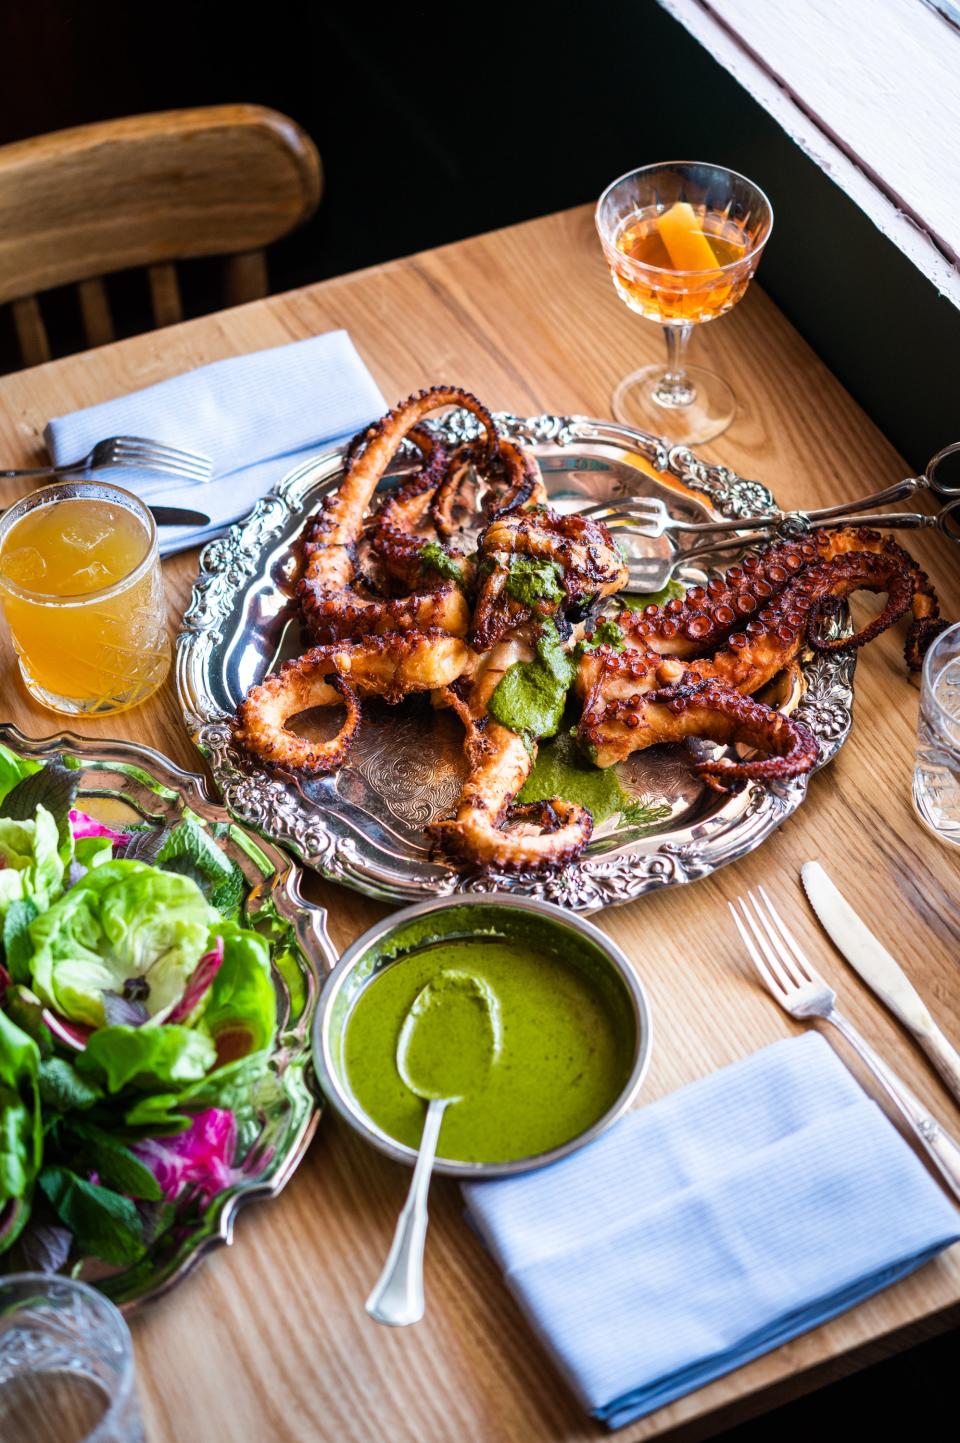 Ssam-style charmoula octopus at Uptown's Mister Mao